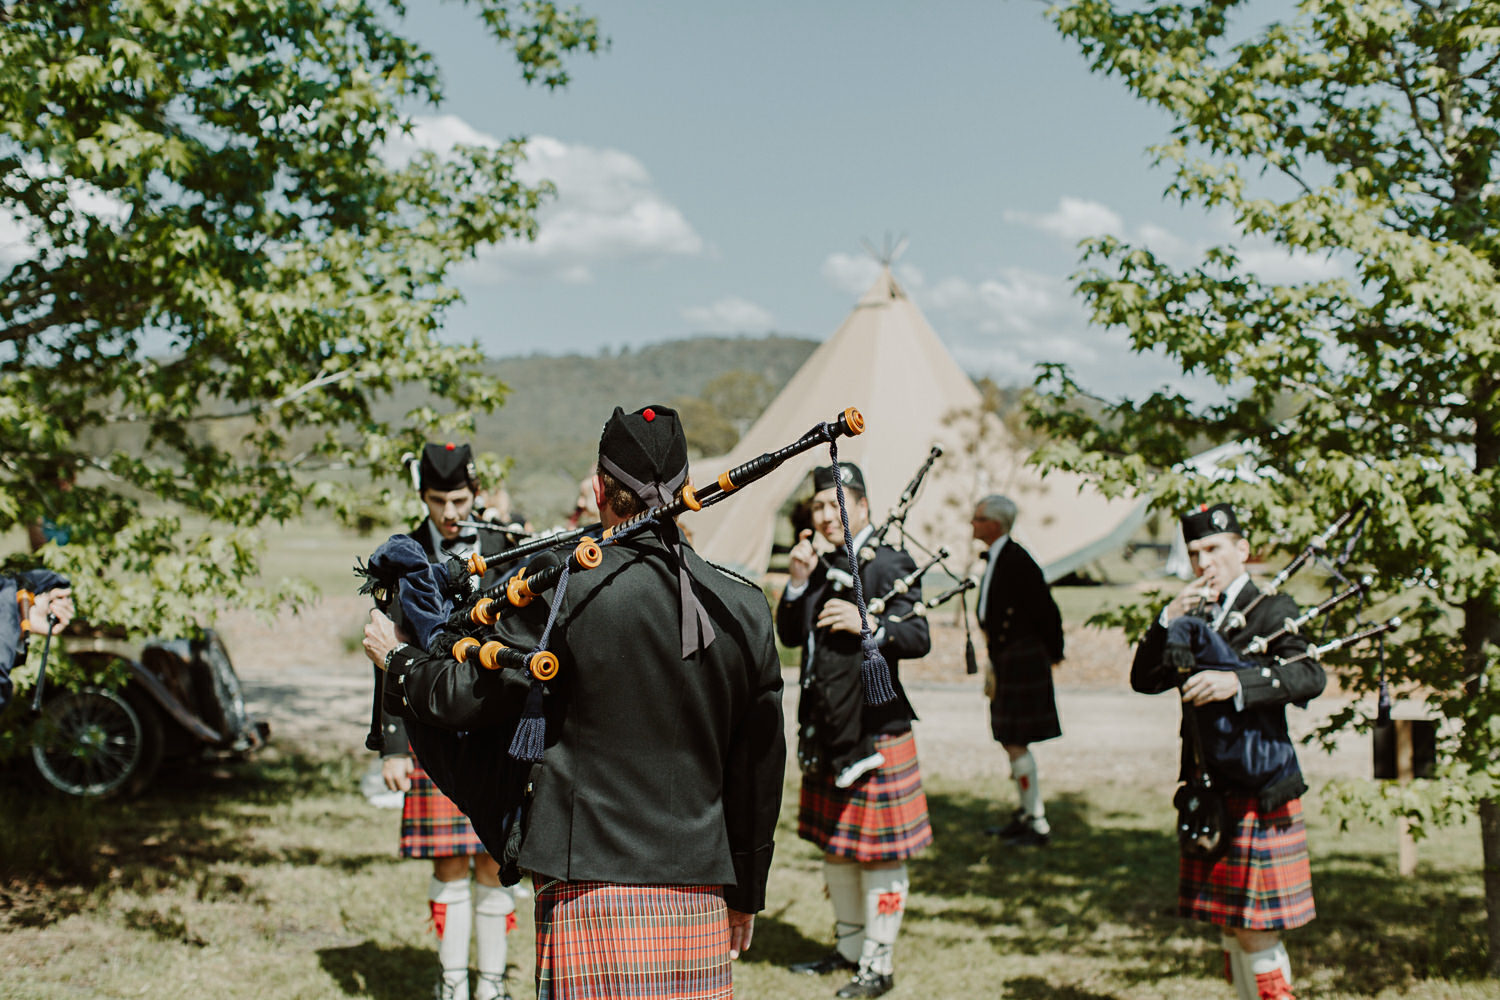 Bagpipers at Heather & James' wedding in Valleyfields, Wollombi